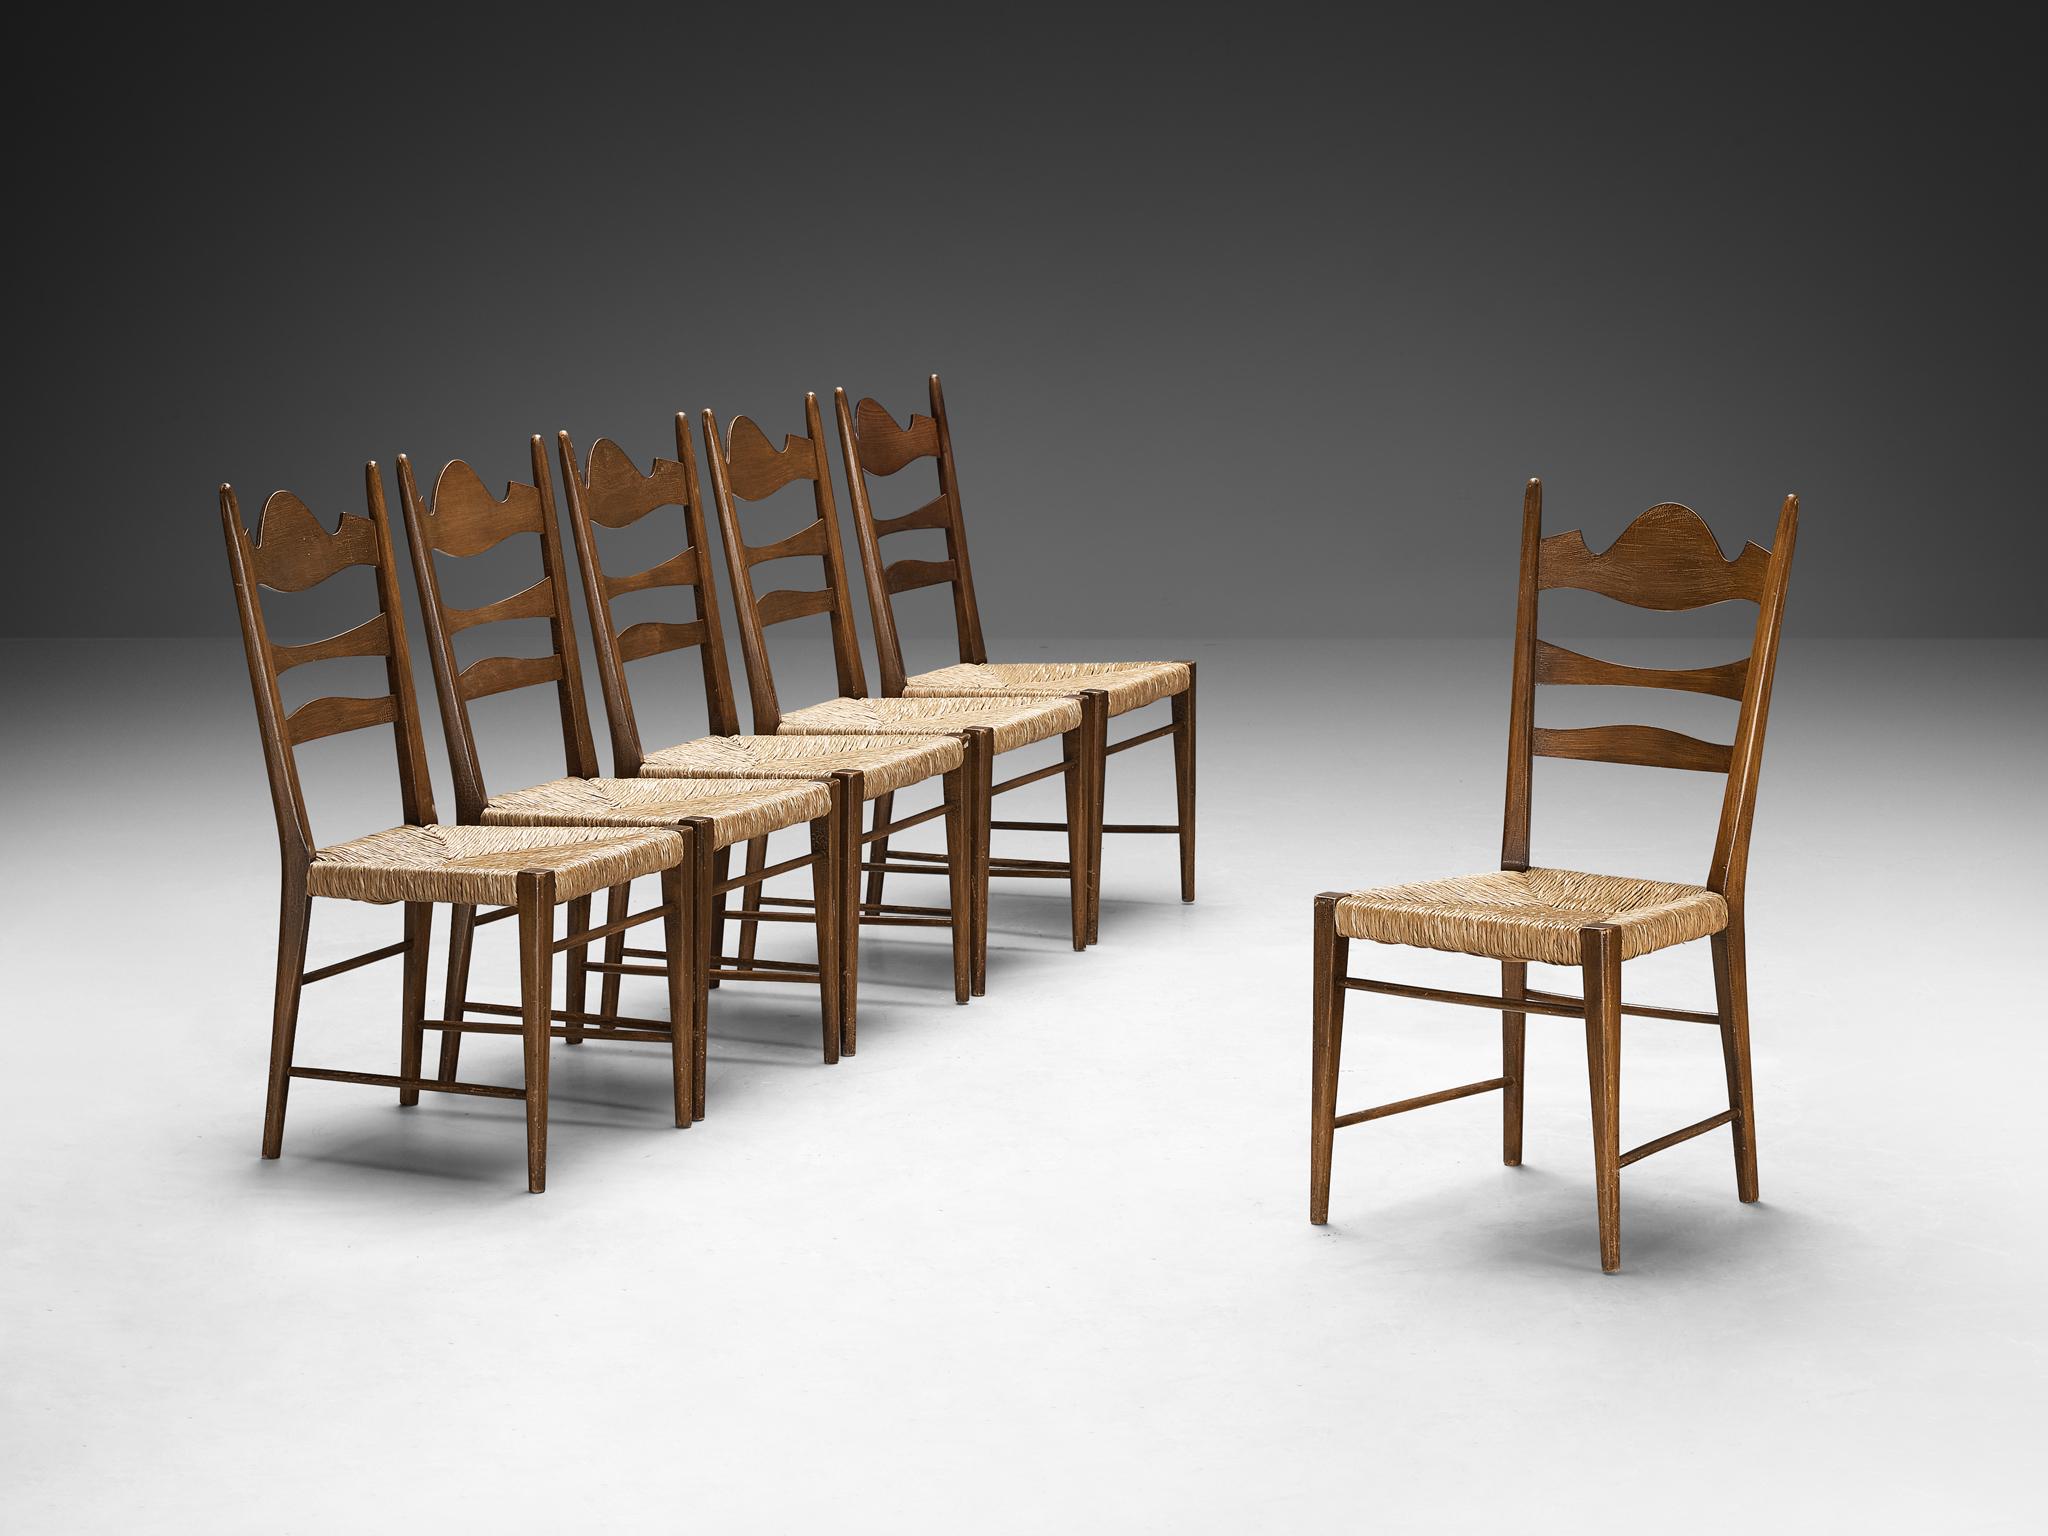 Dining chairs, darkened beech, straw, Italy, 1950s

Crafted with a refined decorative allure and a rustic inclination, these chairs present exquisite craftsmanship and intricate woodcarvings, showcasing a unique design. The backrest features